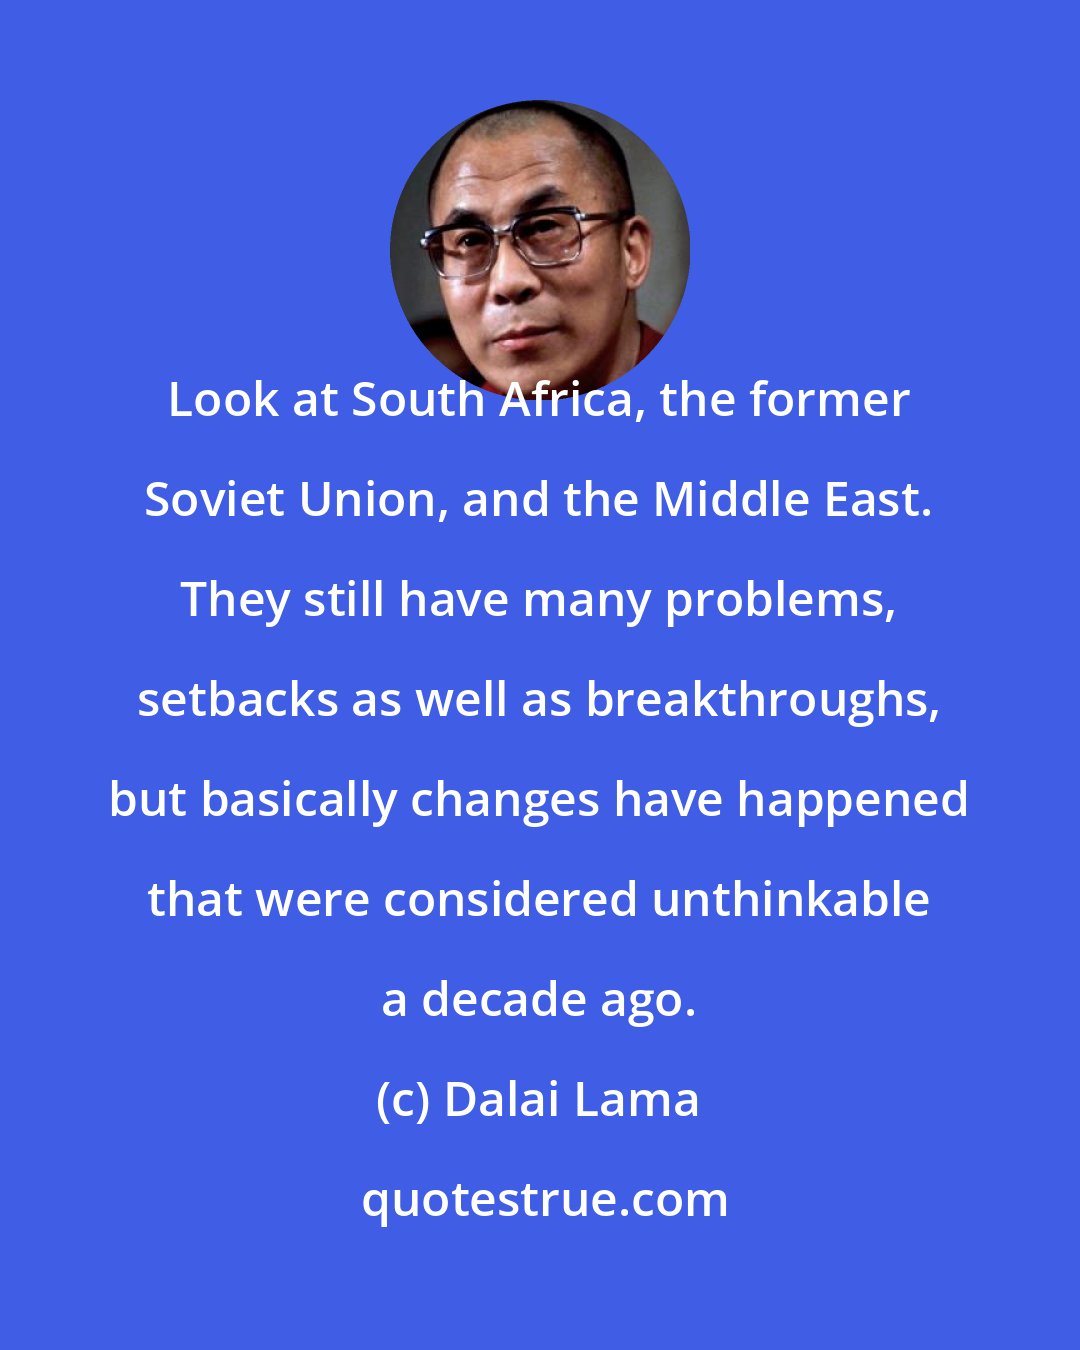 Dalai Lama: Look at South Africa, the former Soviet Union, and the Middle East. They still have many problems, setbacks as well as breakthroughs, but basically changes have happened that were considered unthinkable a decade ago.